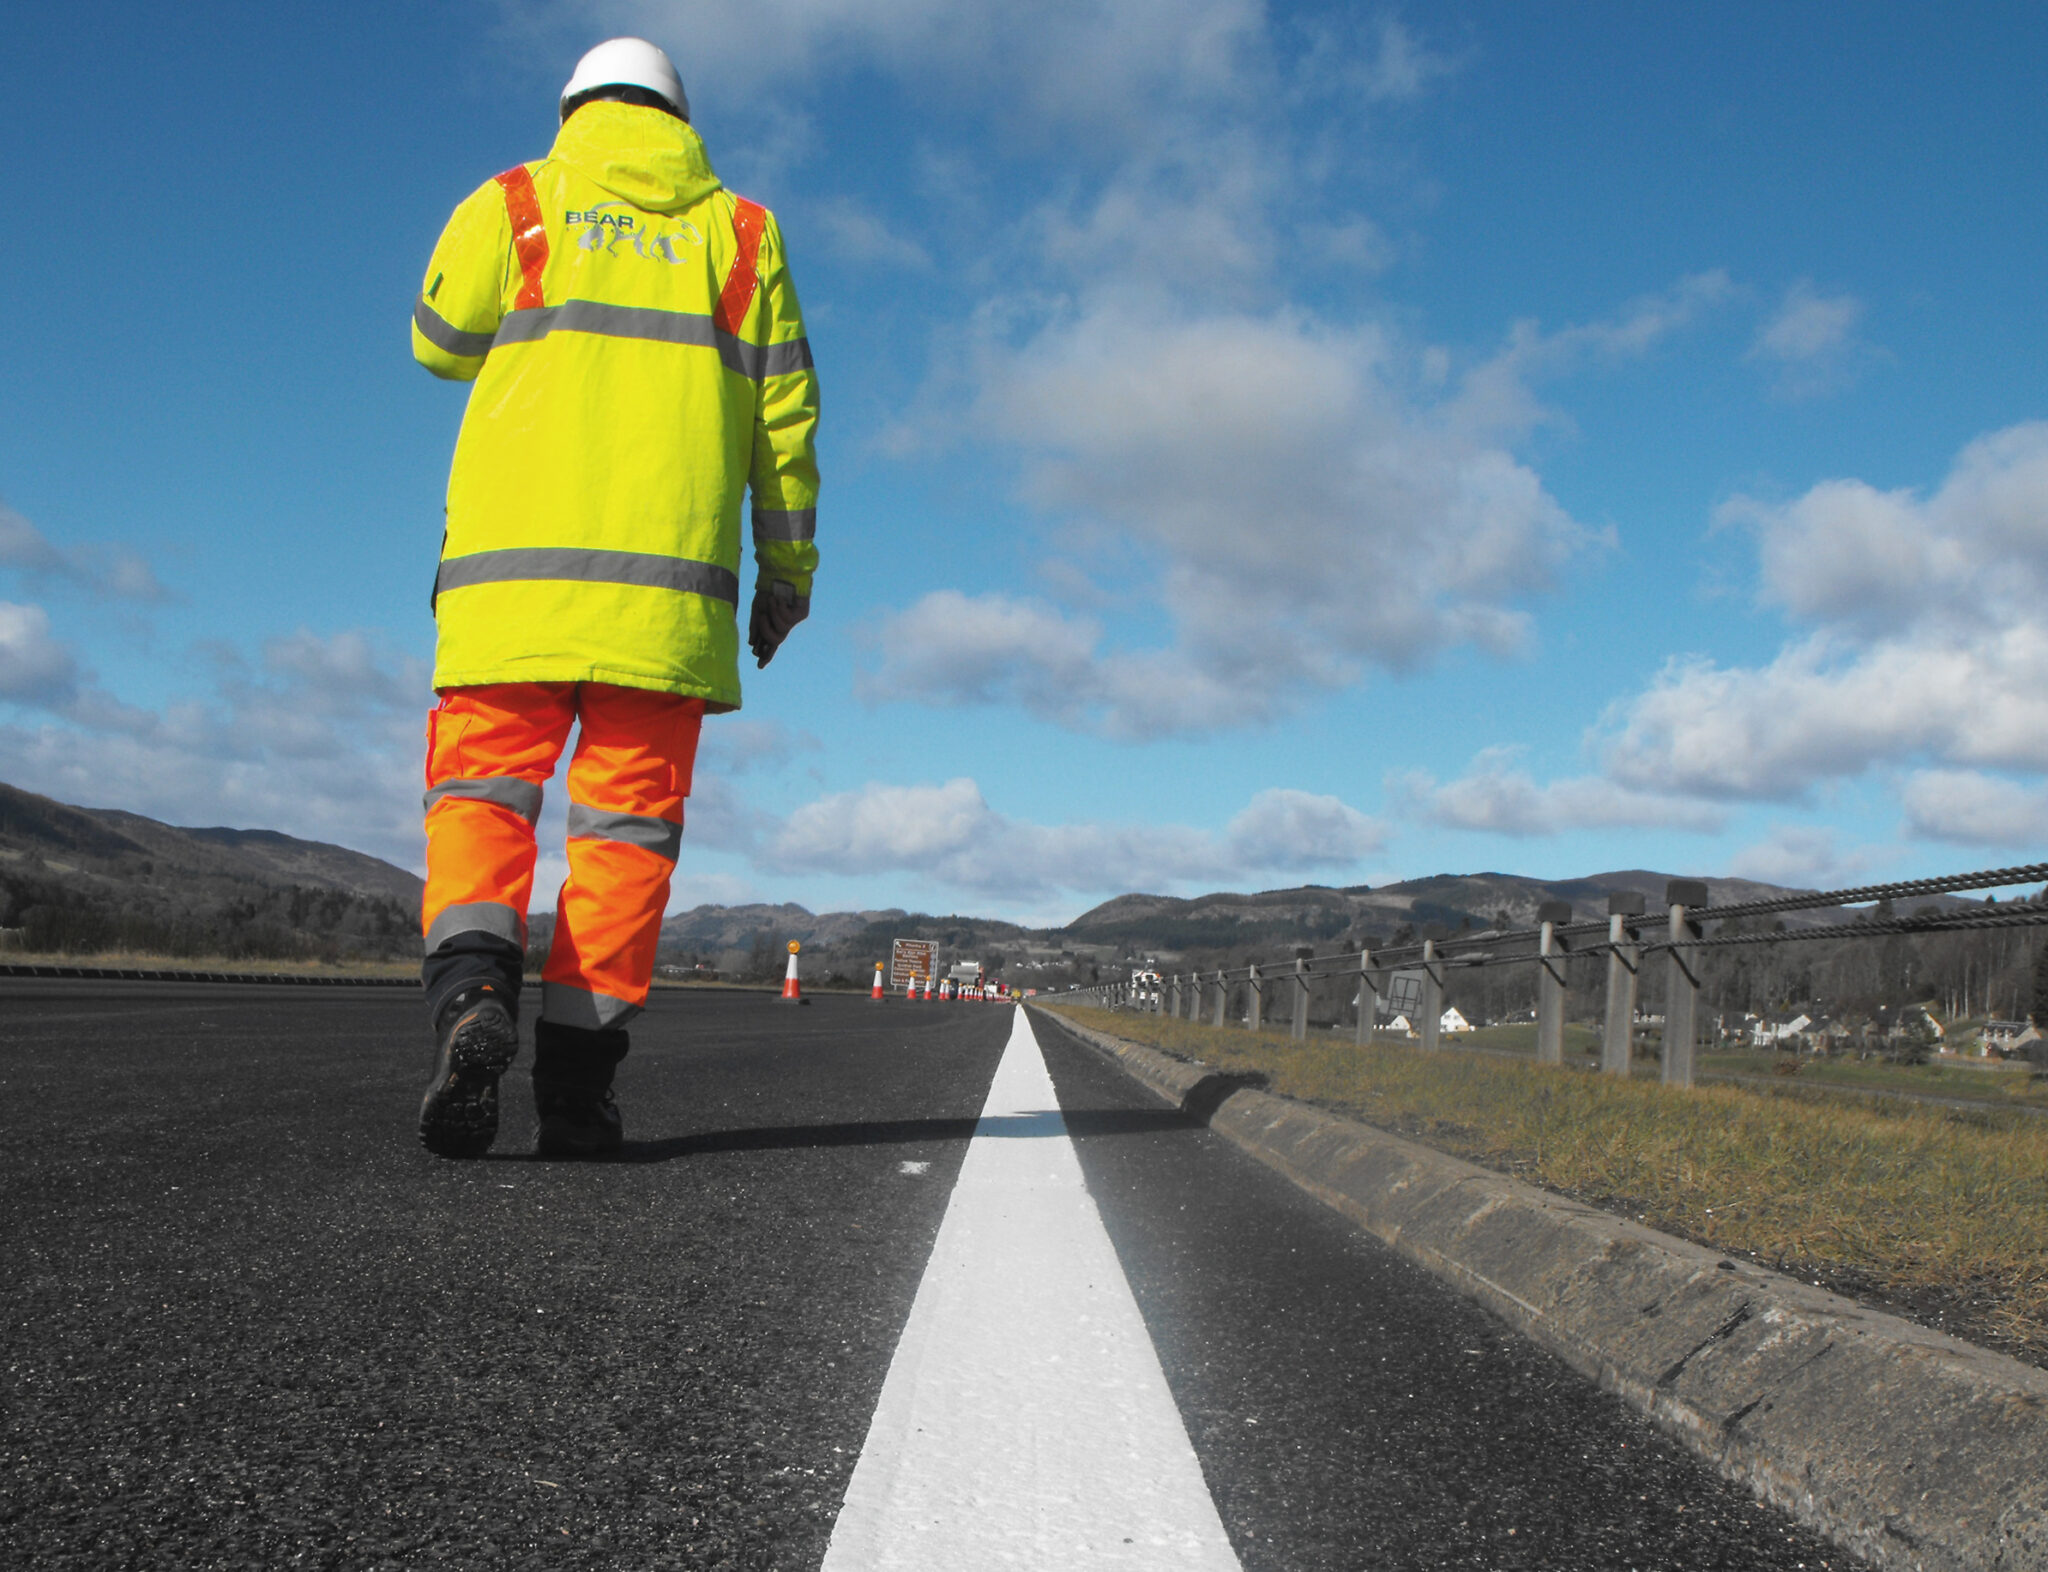 £50,000 FOOTWAY IMPROVEMENTS PLANNED TO TAKE PLACE ON THE A82 THROUGH TYNDRUM